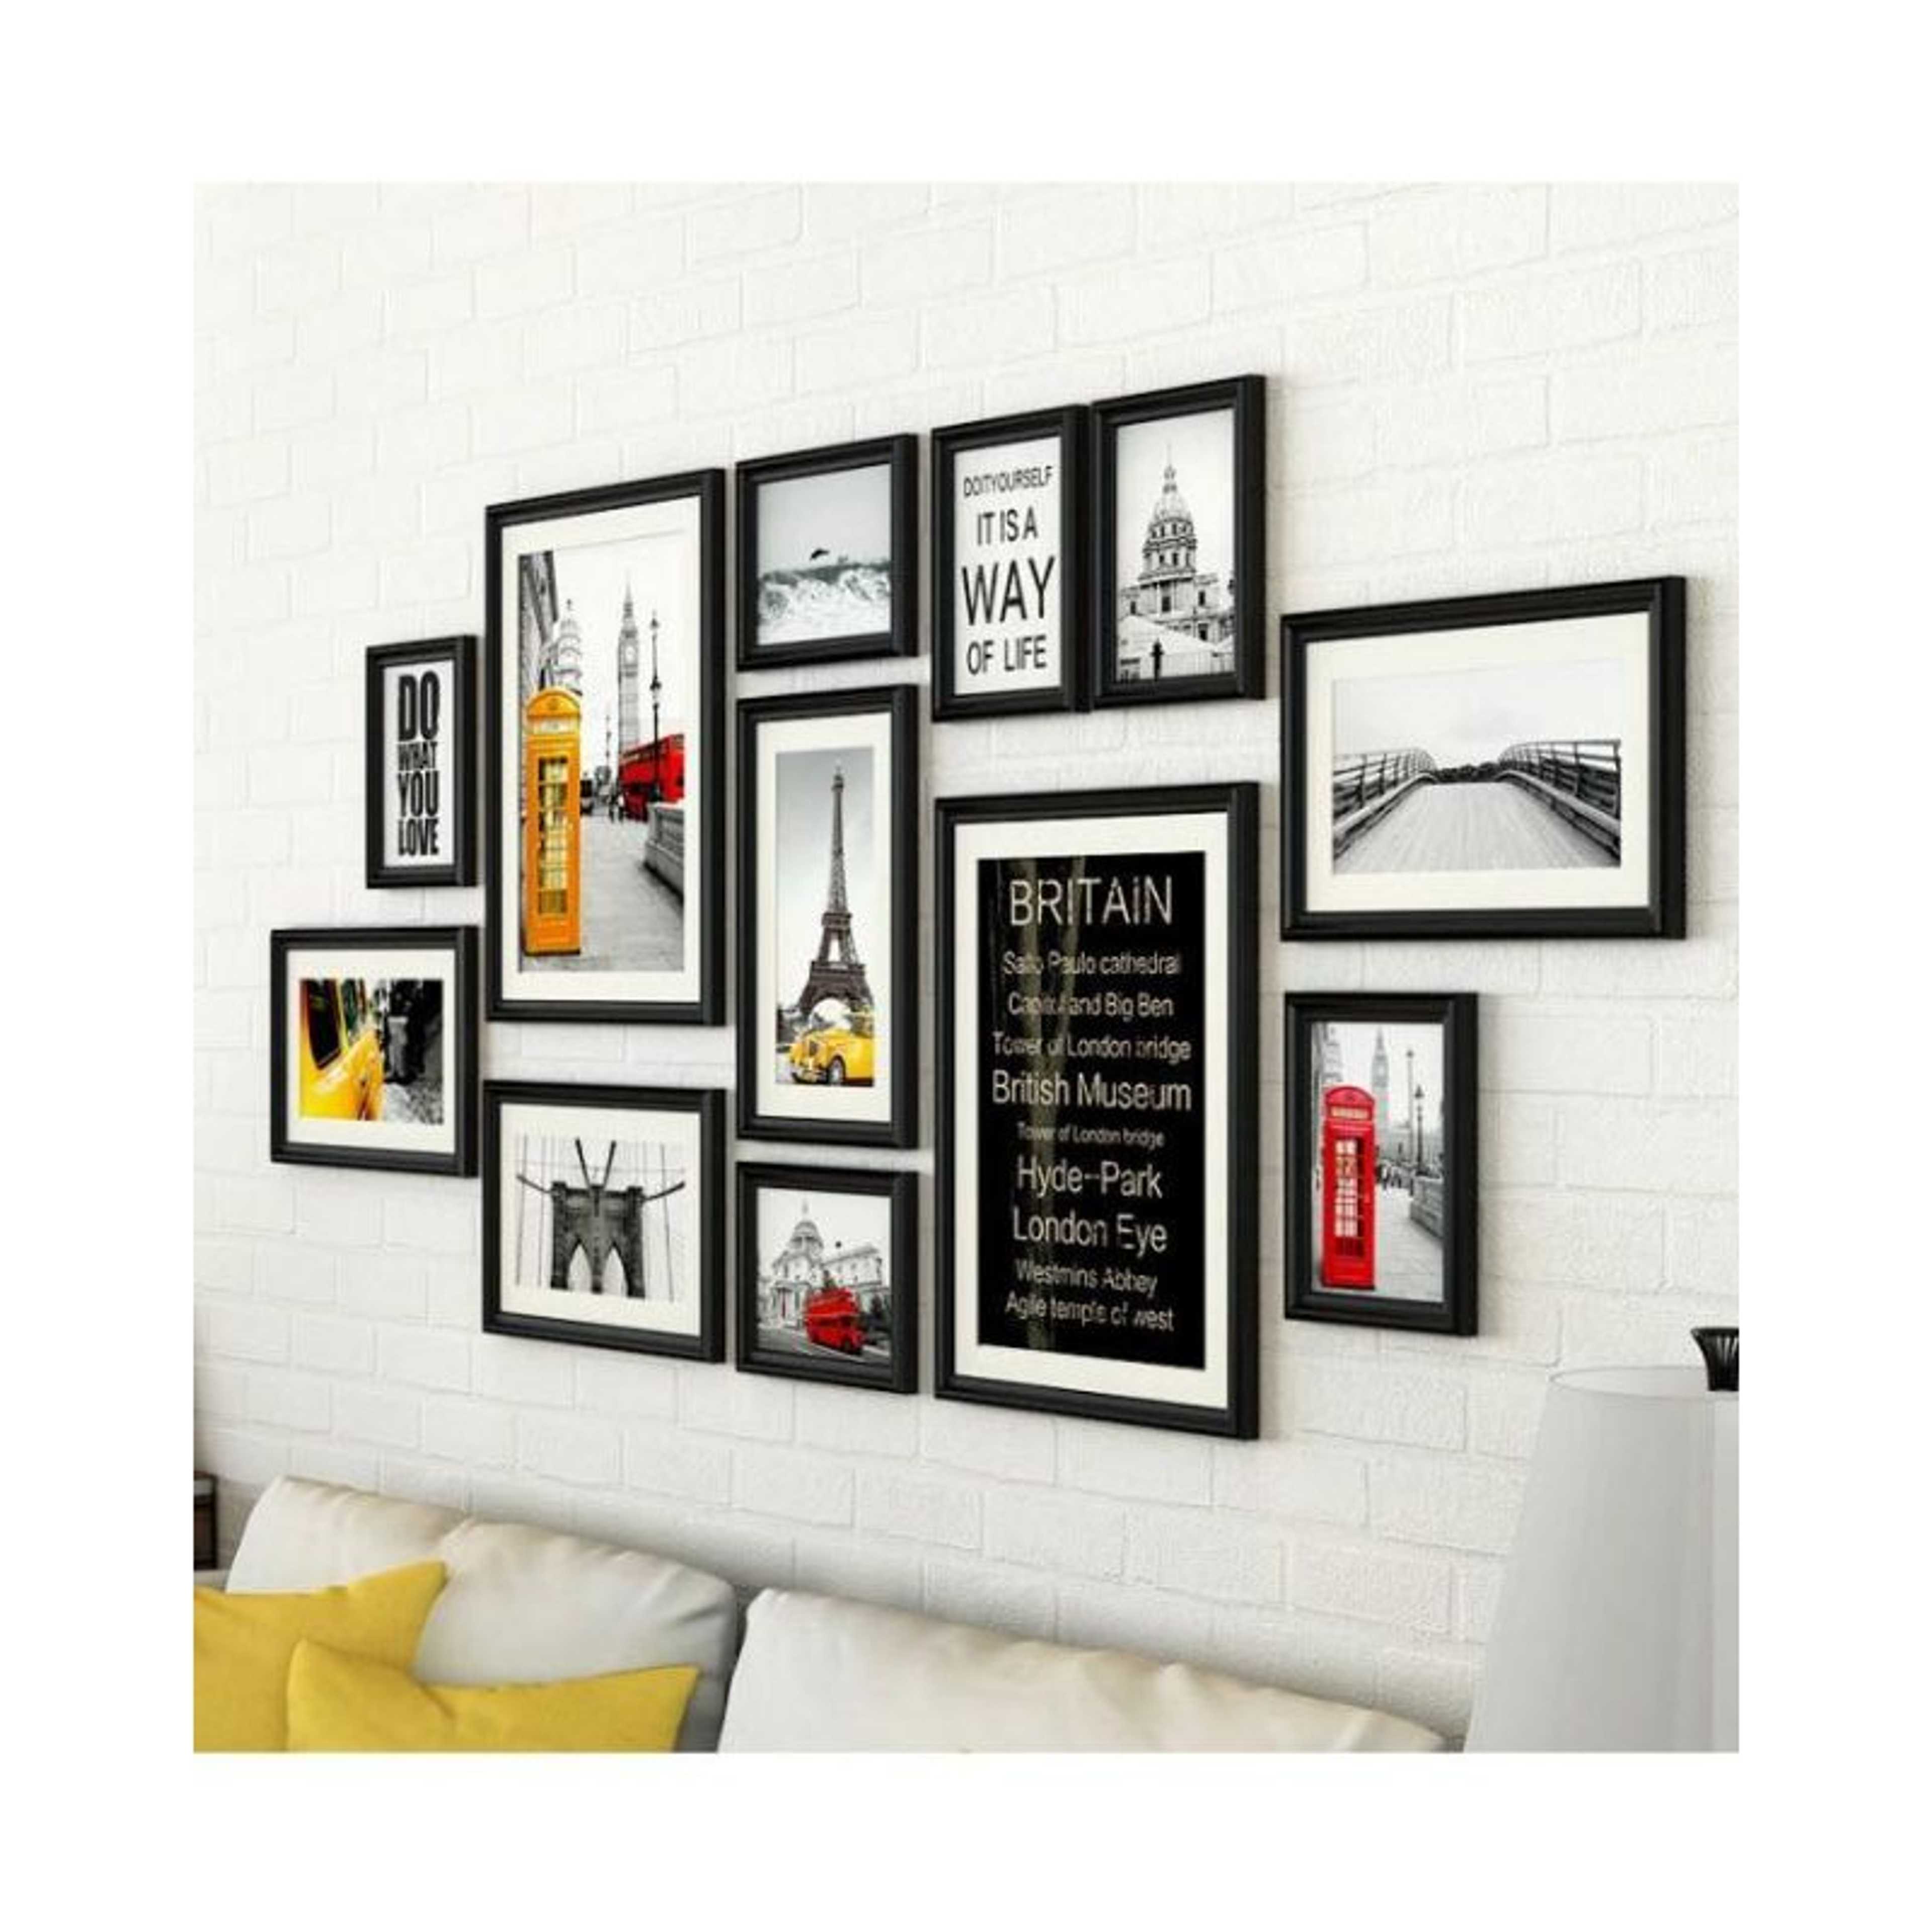 Set of 12 - Photo Frames Collage Wall Hanging Wall Decor Set